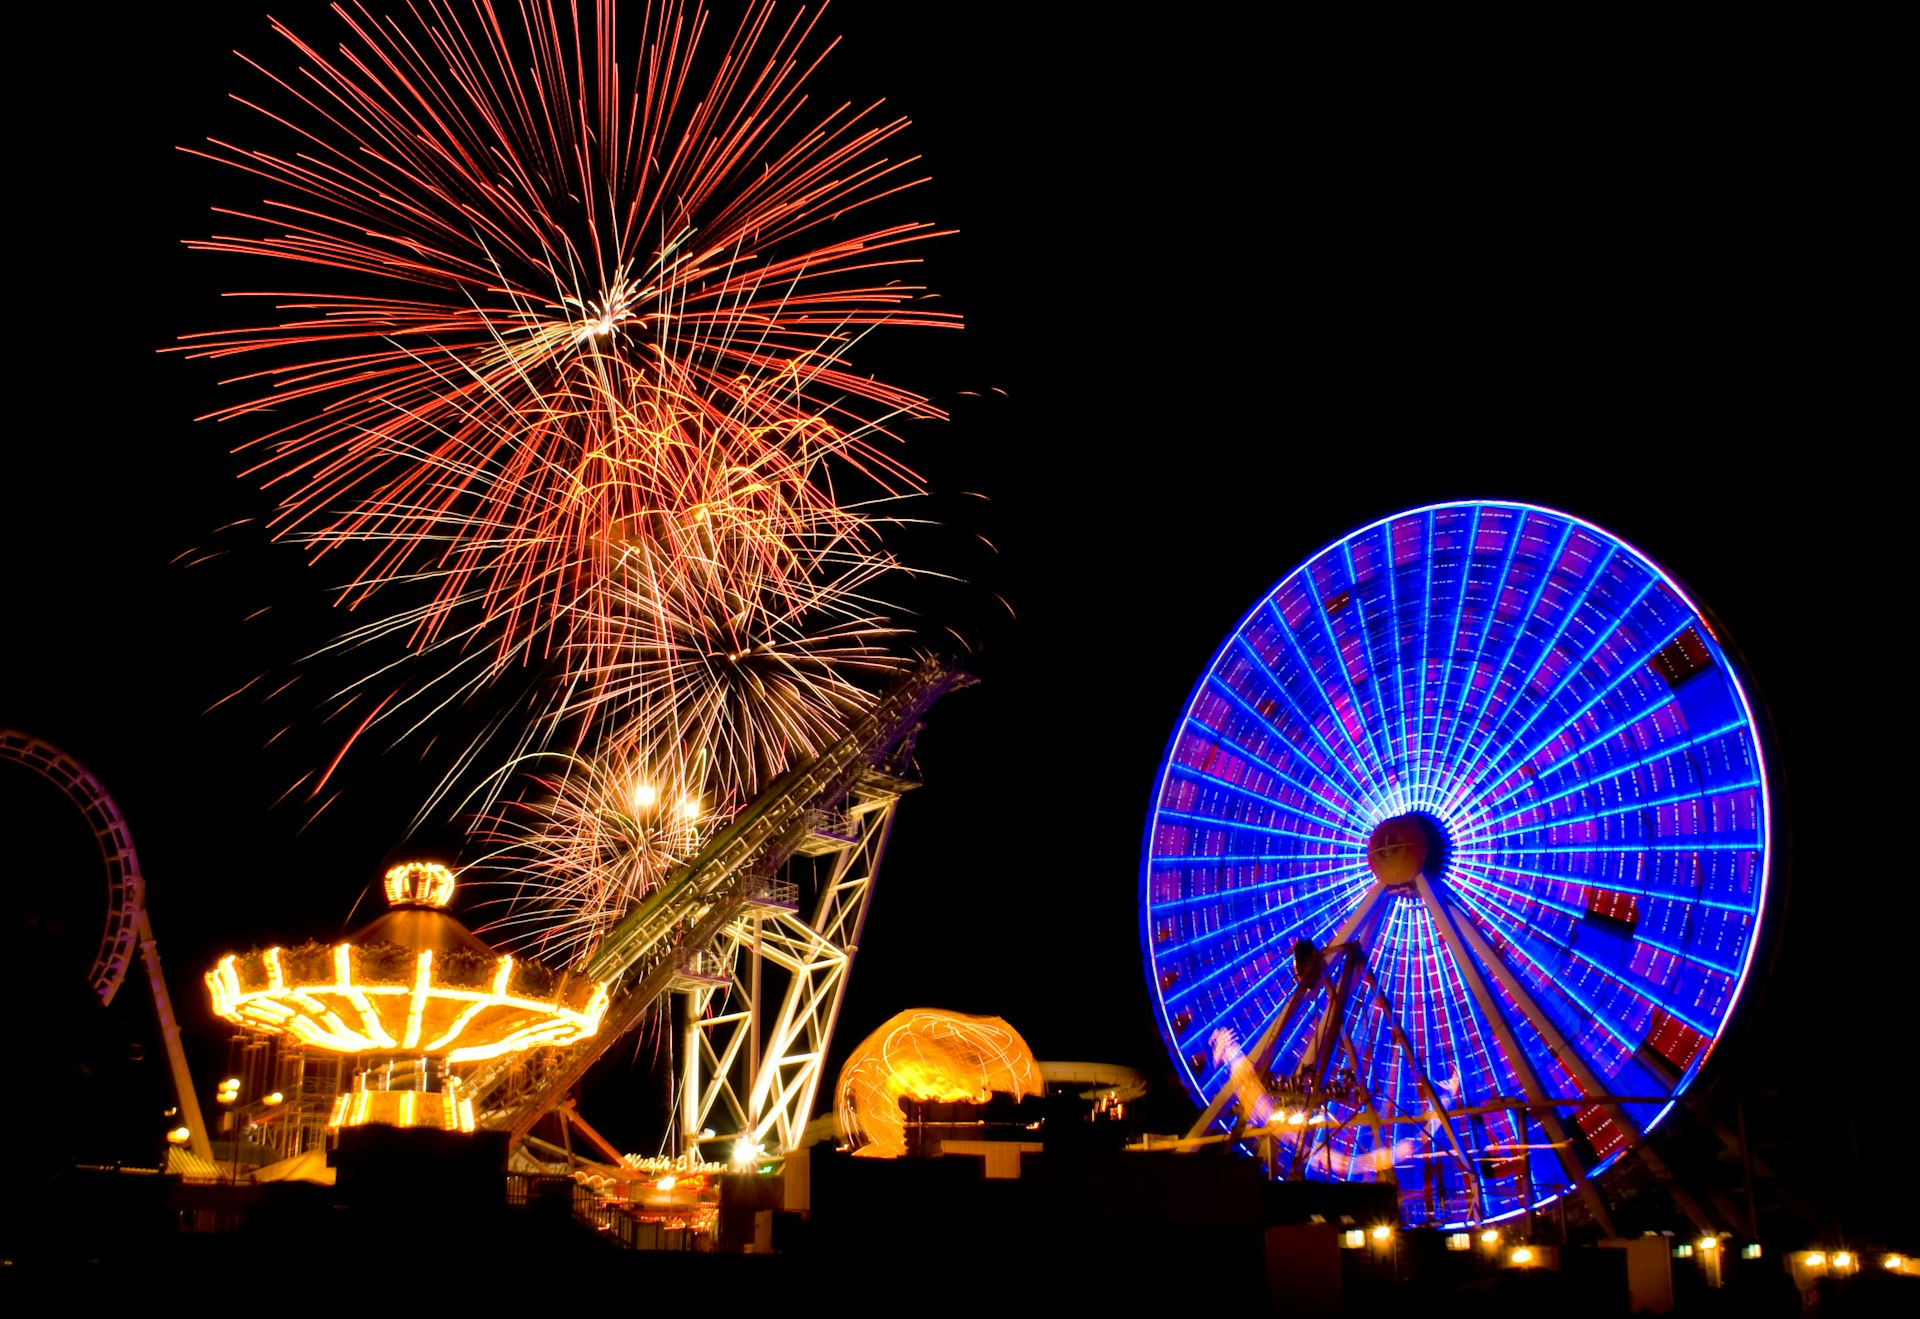 Amusement park rides, including a large ferris wheel light up at night as huge fireworks explode overhead. 